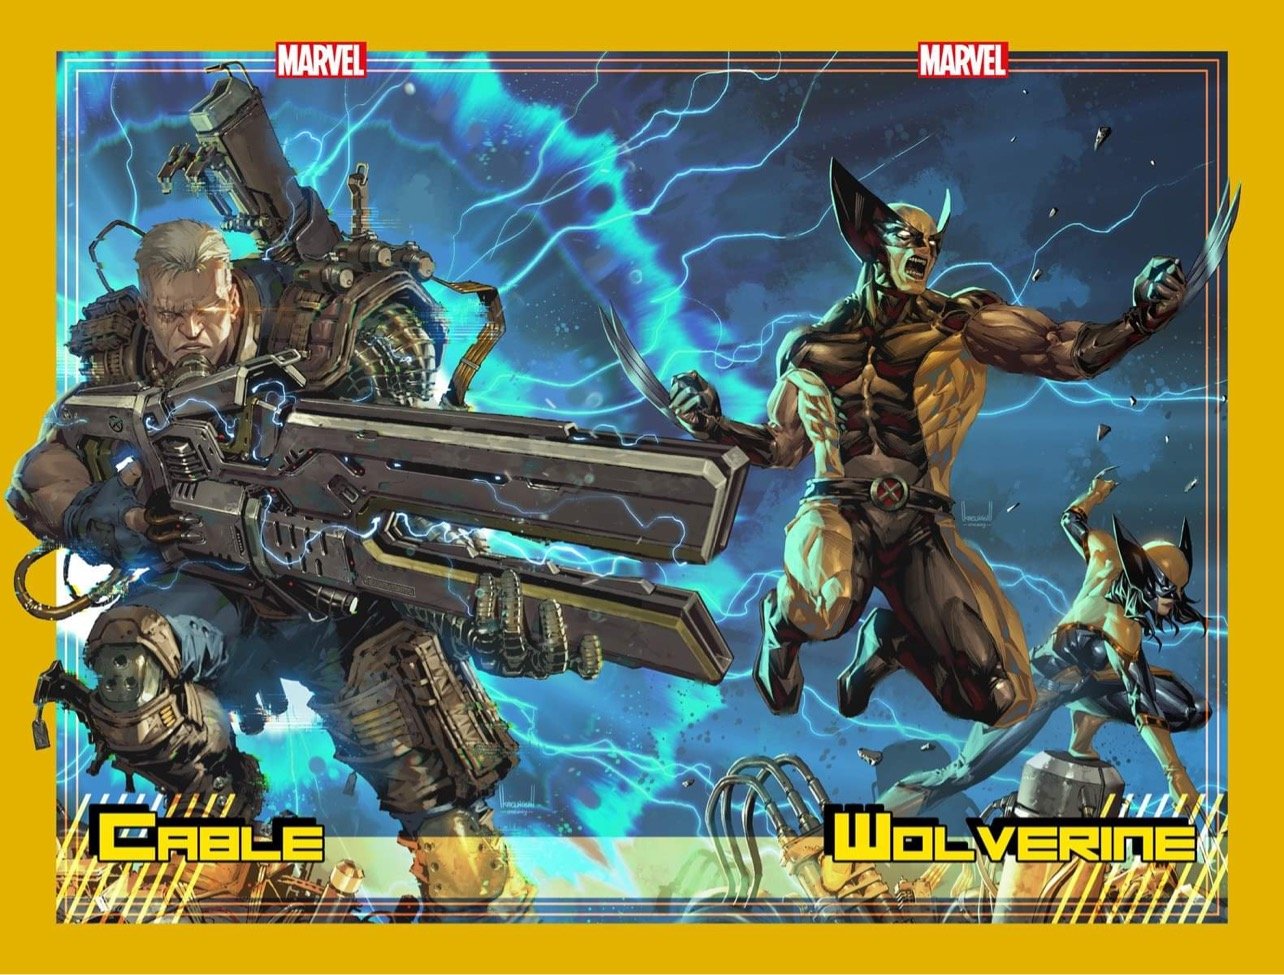 WOLVERINE  #13 AND CABLE #11